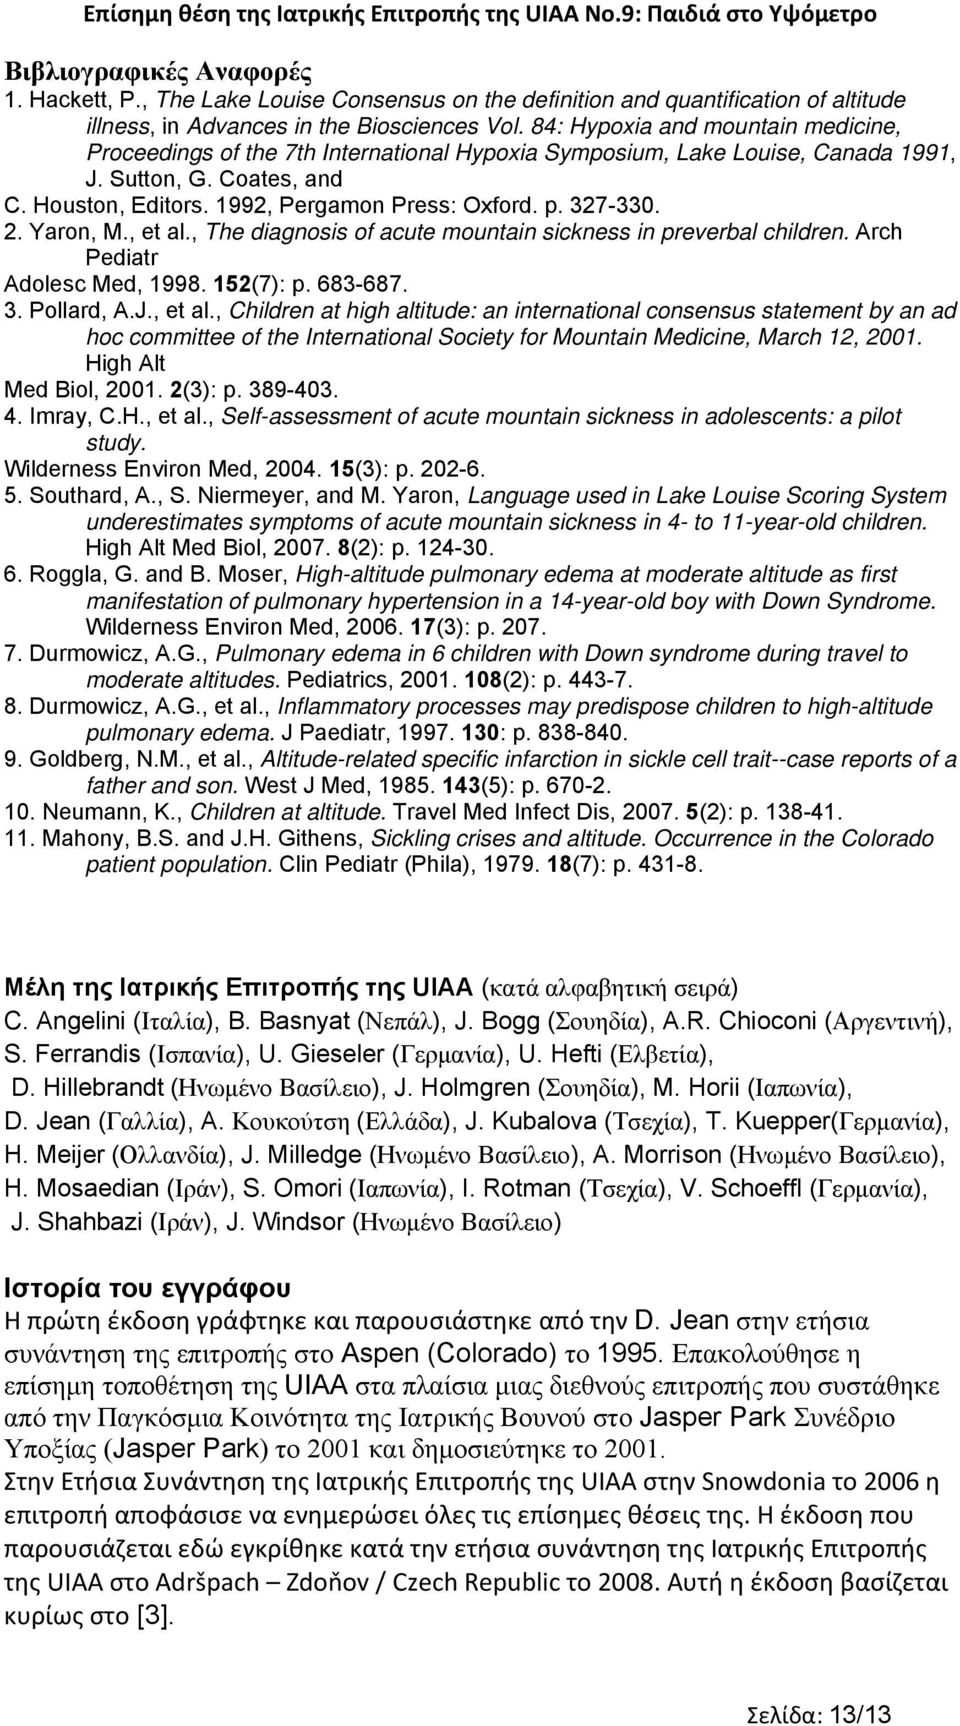 . Yaron, M., et al., The diagnosis of acute mountain sickness in preverbal children. Arch Pediatr Adolesc Med, 998. 5(7): p. 68-687.. Pollard, A.J., et al., Children at high altitude: an international consensus statement by an ad hoc committee of the International Society for Mountain Medicine, March,.